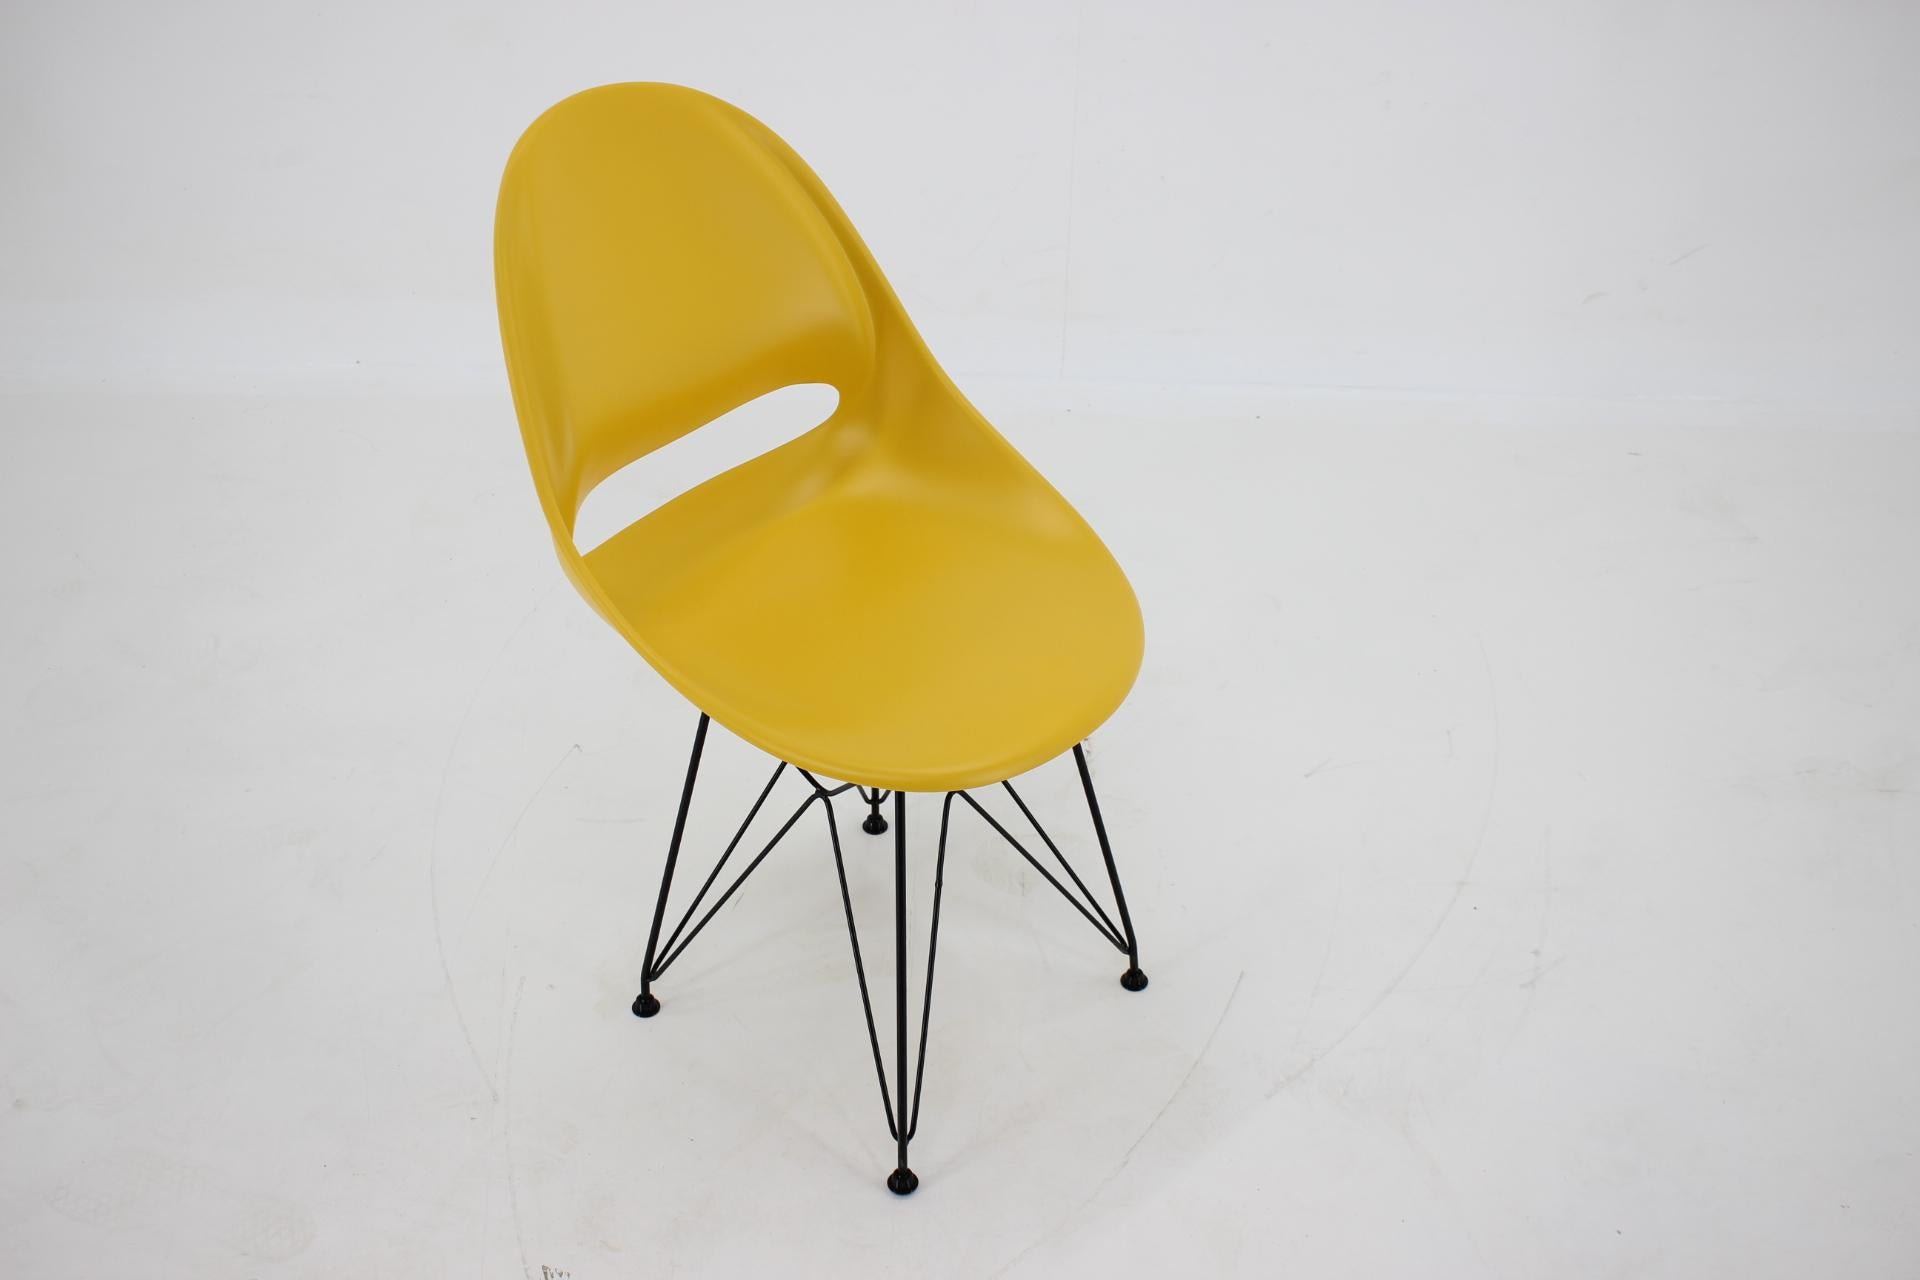 Set of 4 Midcentury Yellow Design Fiberglass Dining Chairs by M.Navratil, 1960s For Sale 7